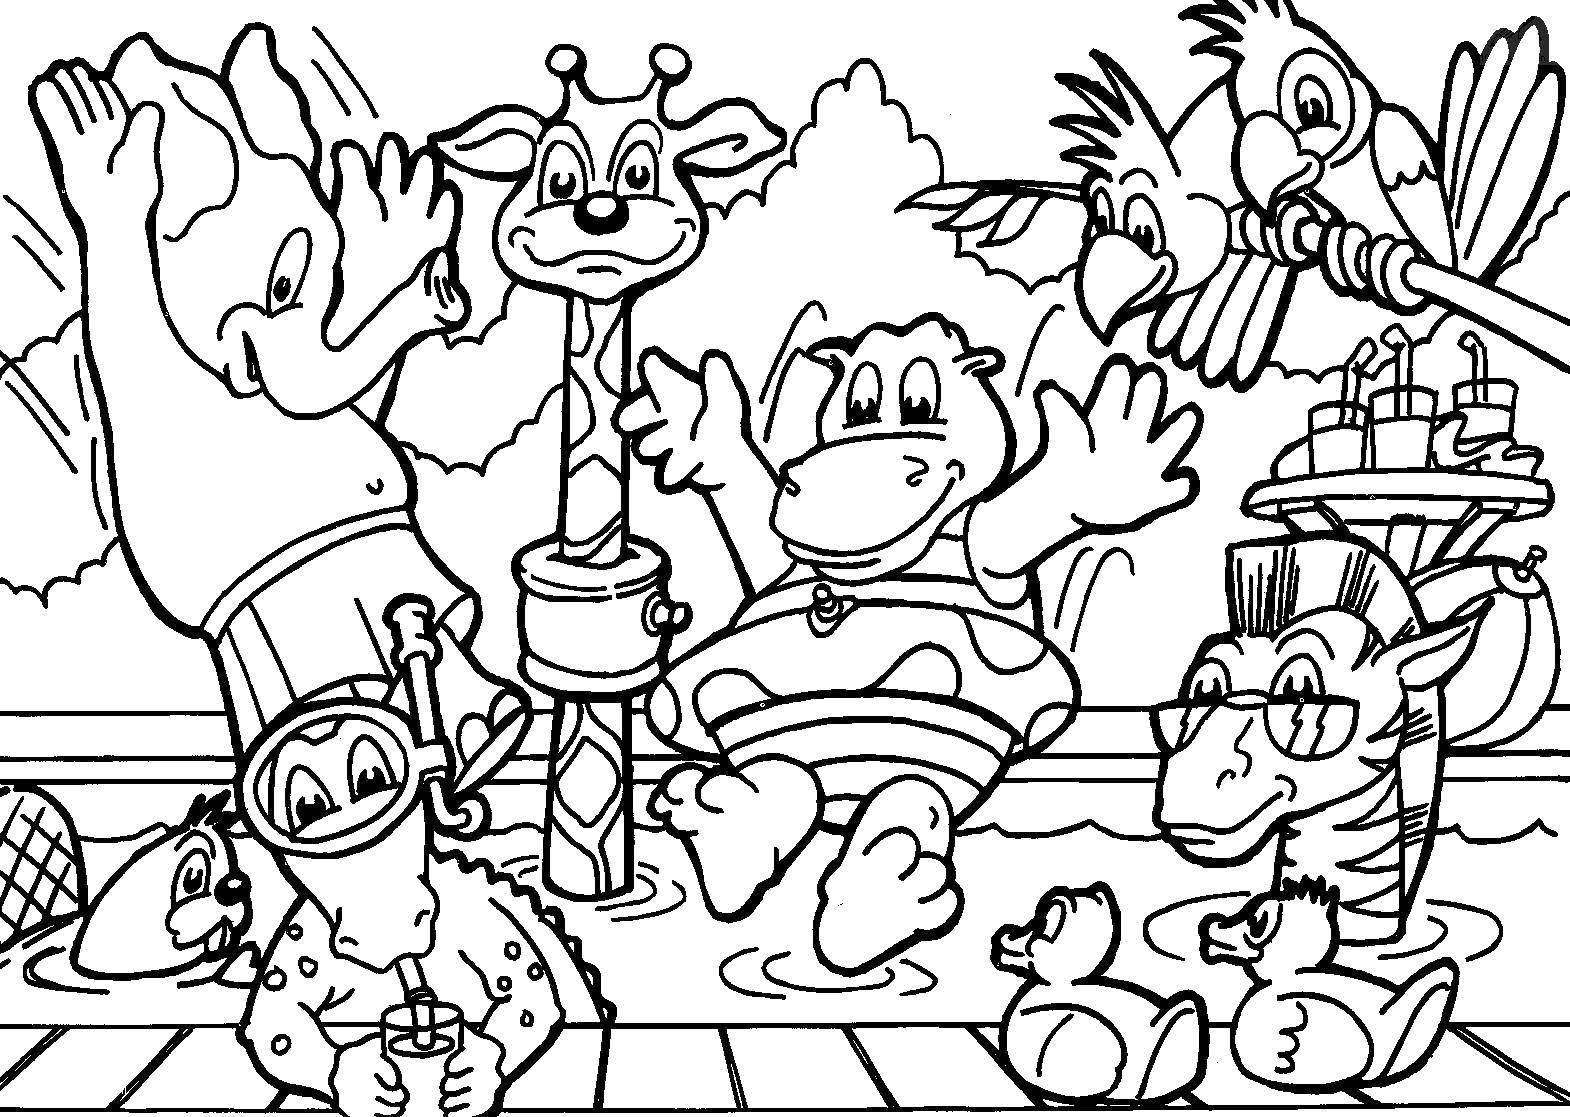 Coloring Zoo frenzy. Category animals. Tags:  zoo, animals.